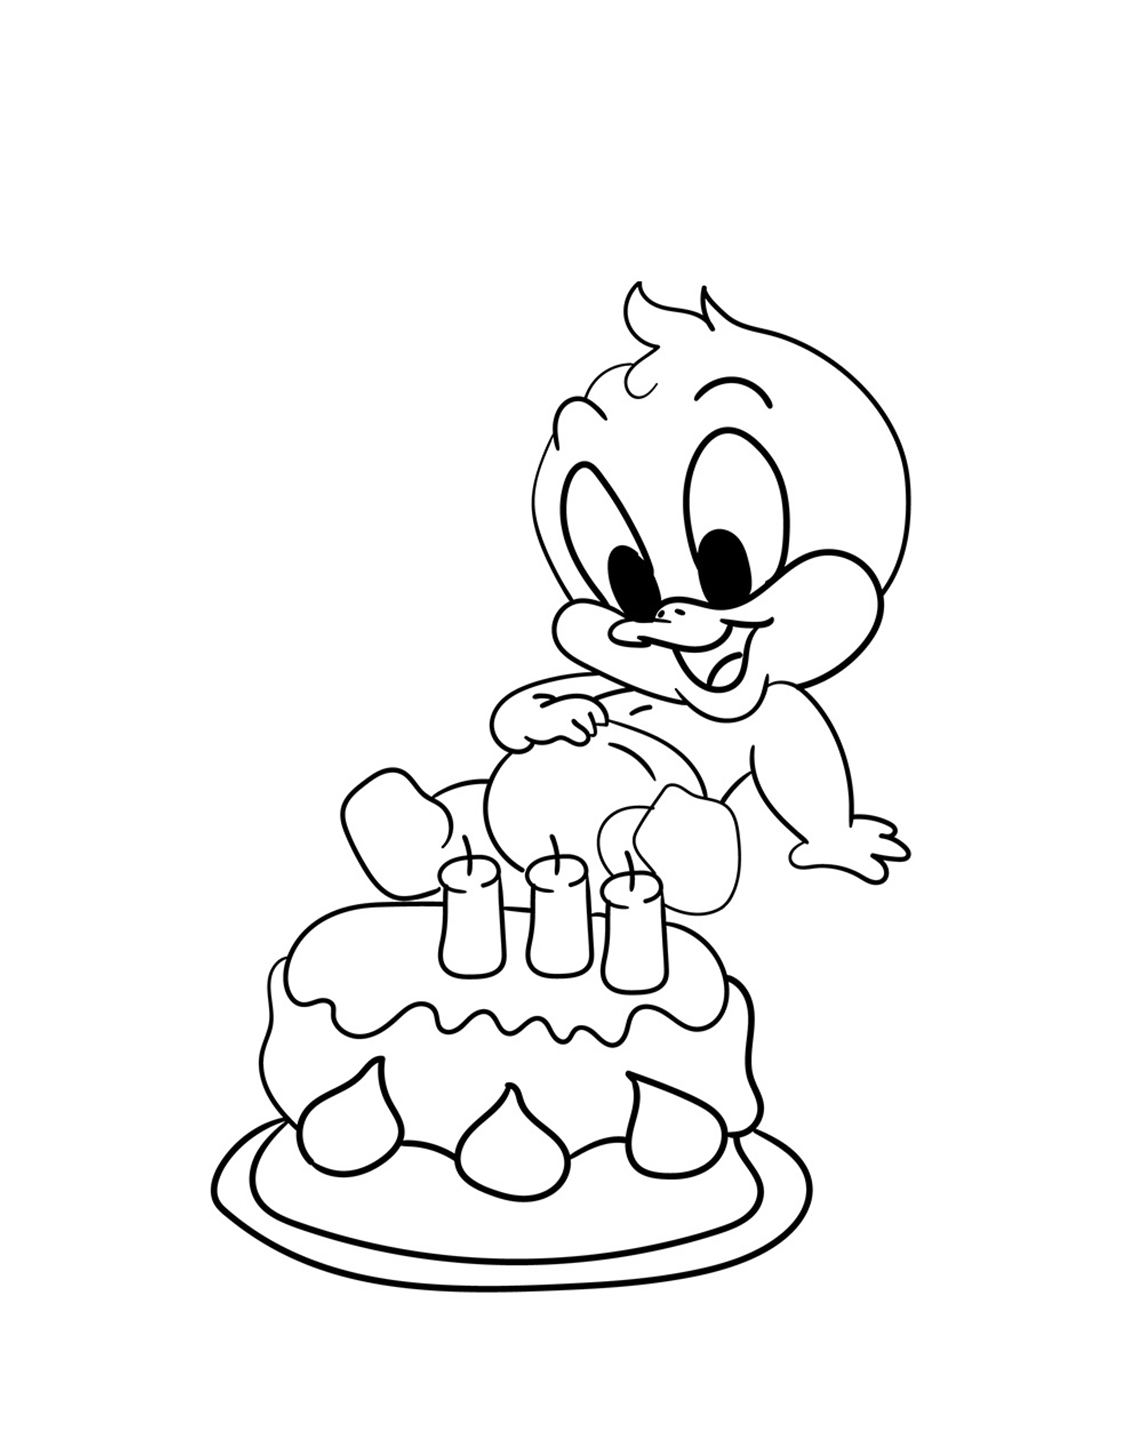 Baby Daffy Duck Birthday Coloring Page